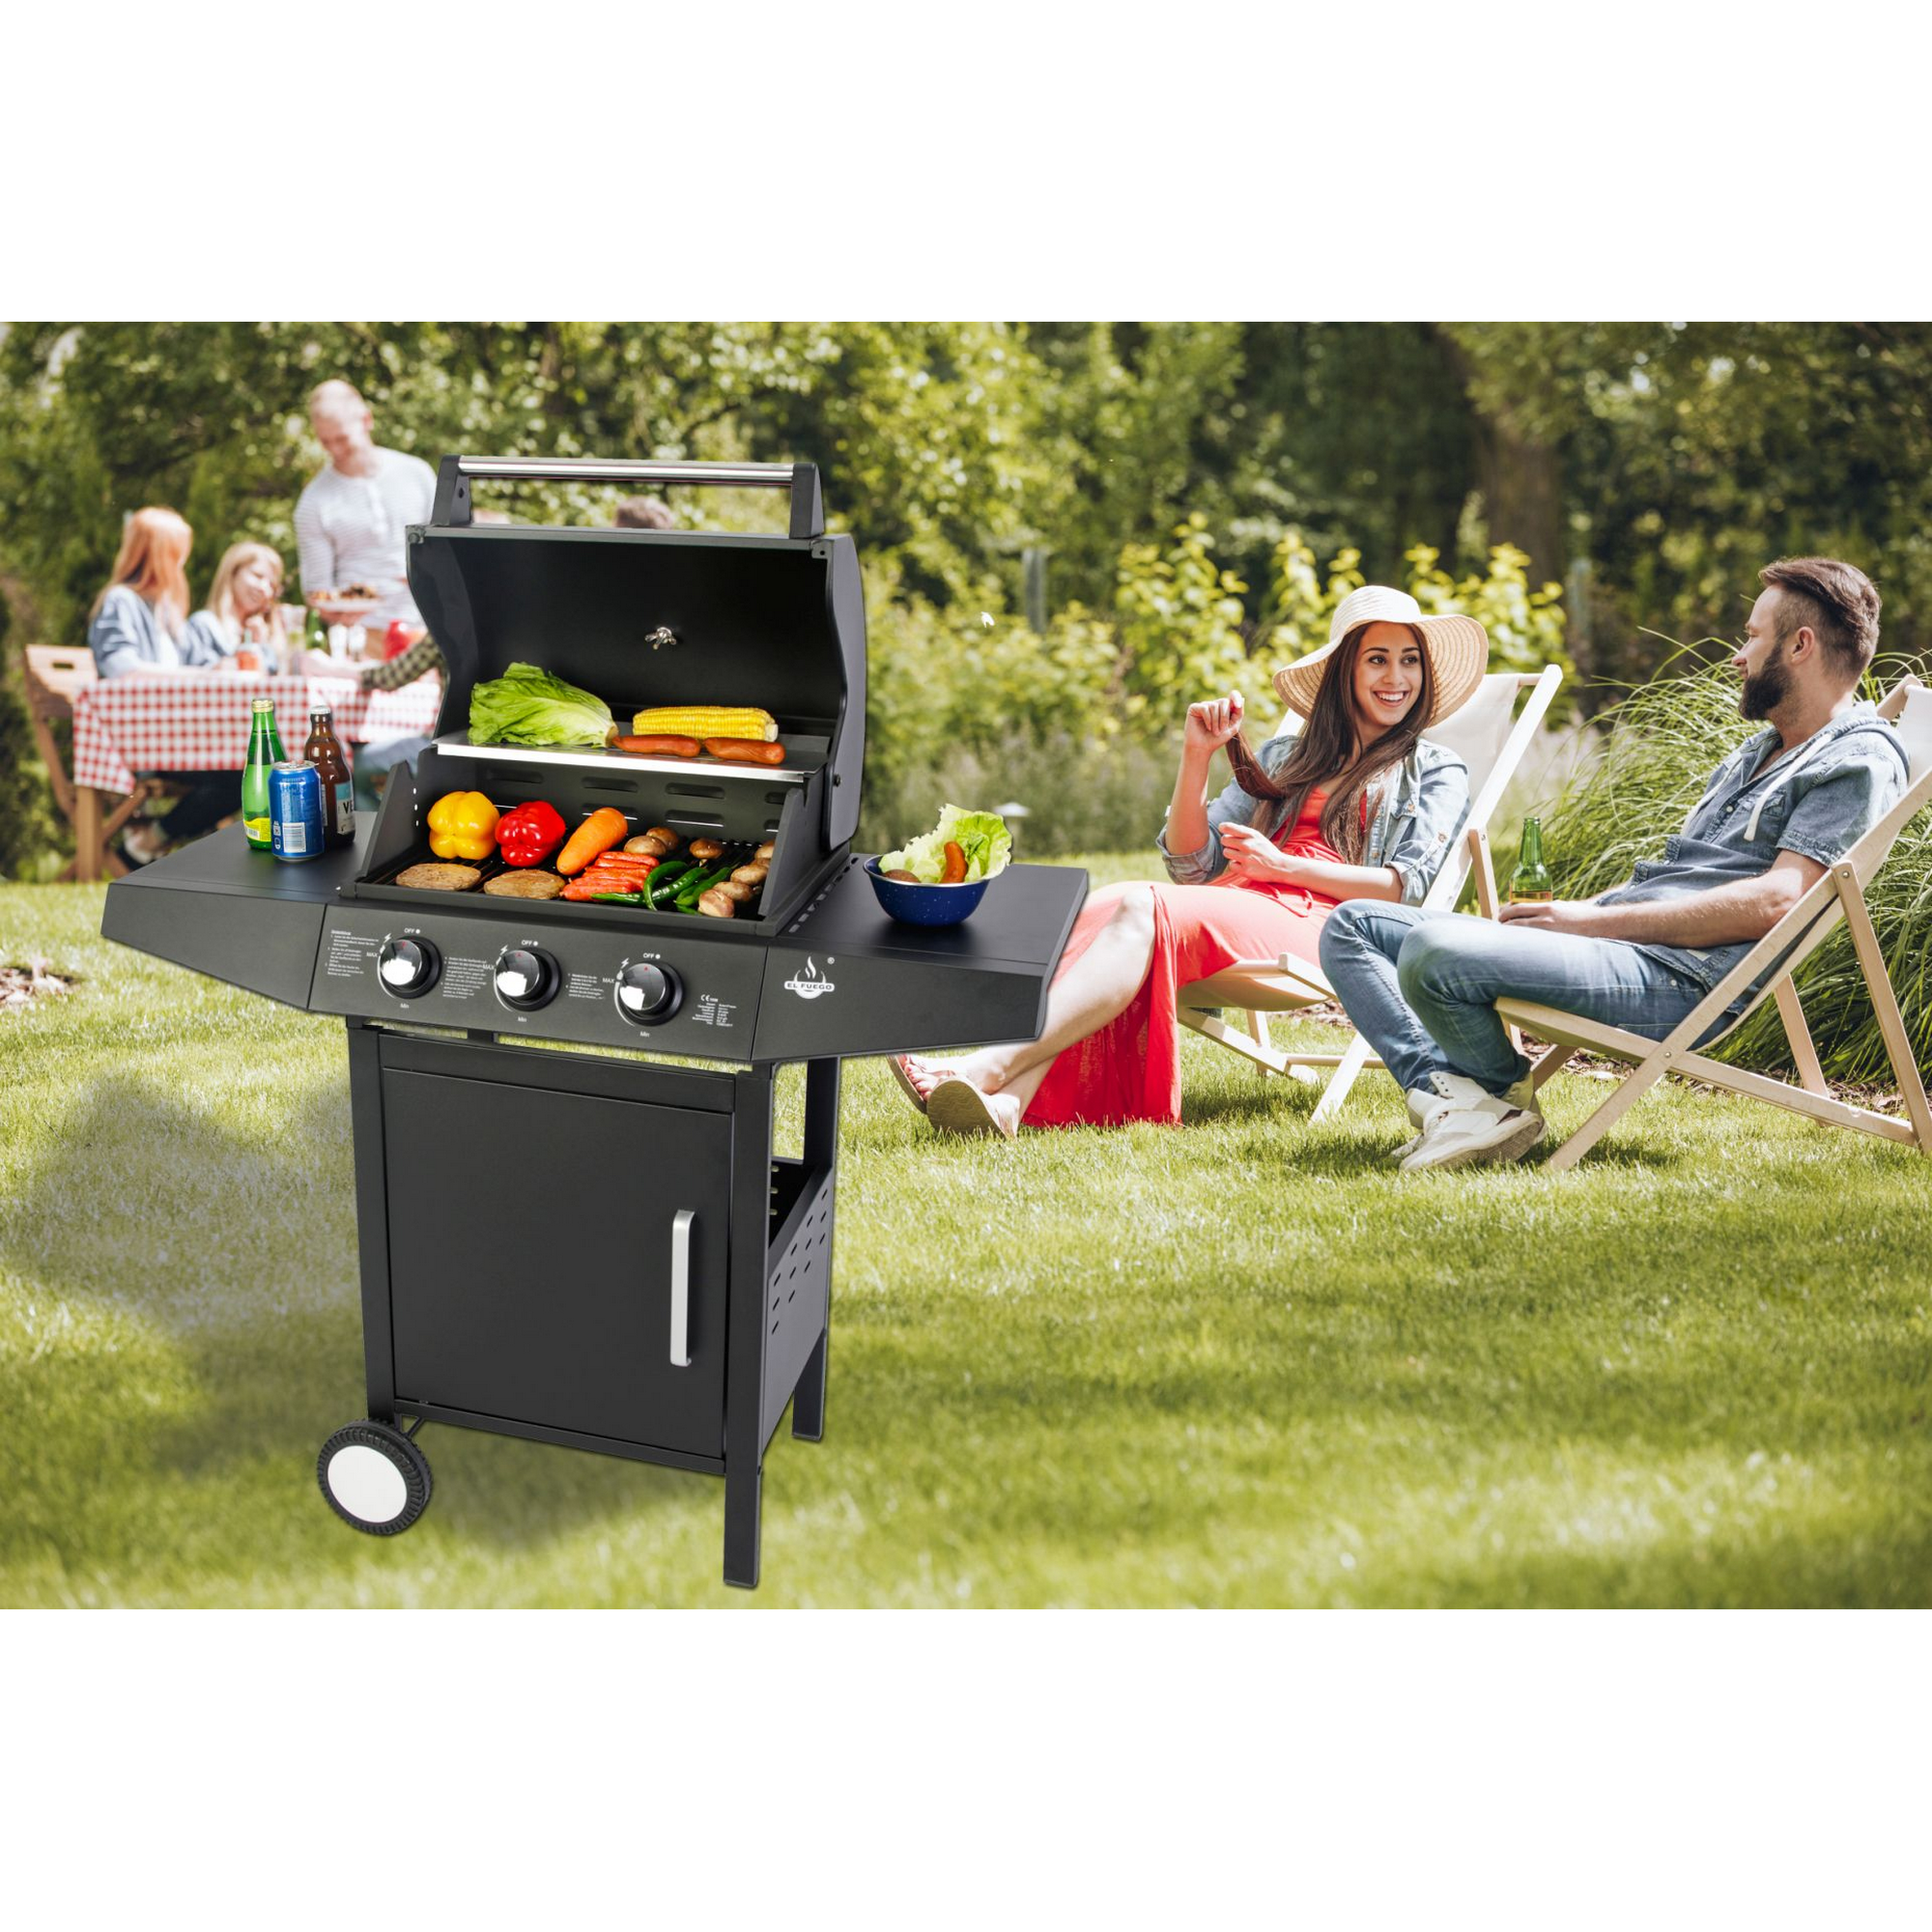 Gasgrill 'San Angelo' schwarz 109,6 x 110,5 x 53 cm + product picture